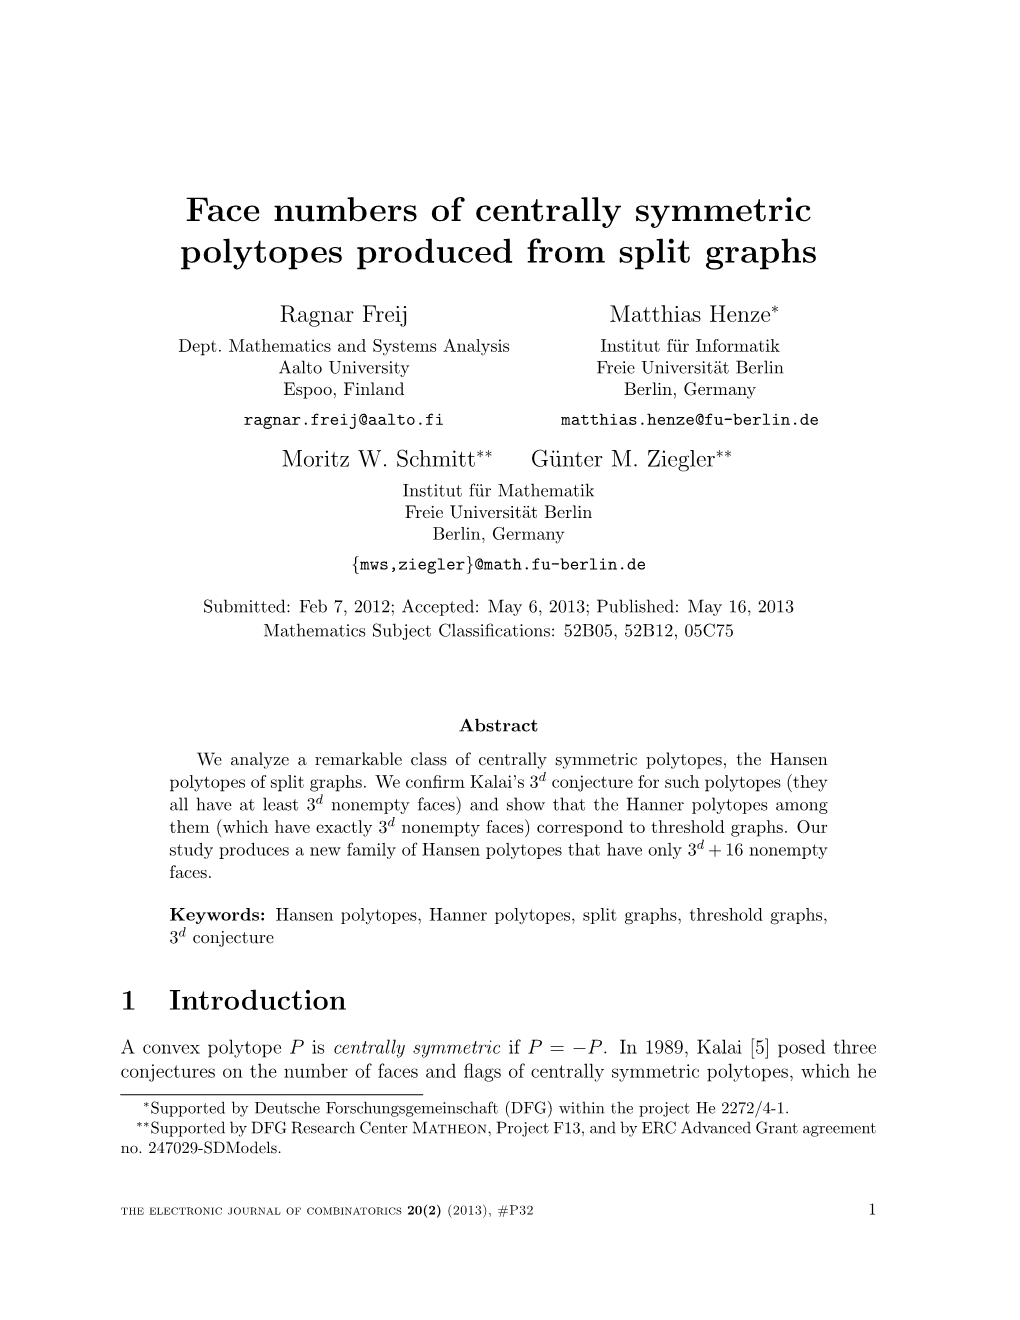 Face Numbers of Centrally Symmetric Polytopes Produced from Split Graphs